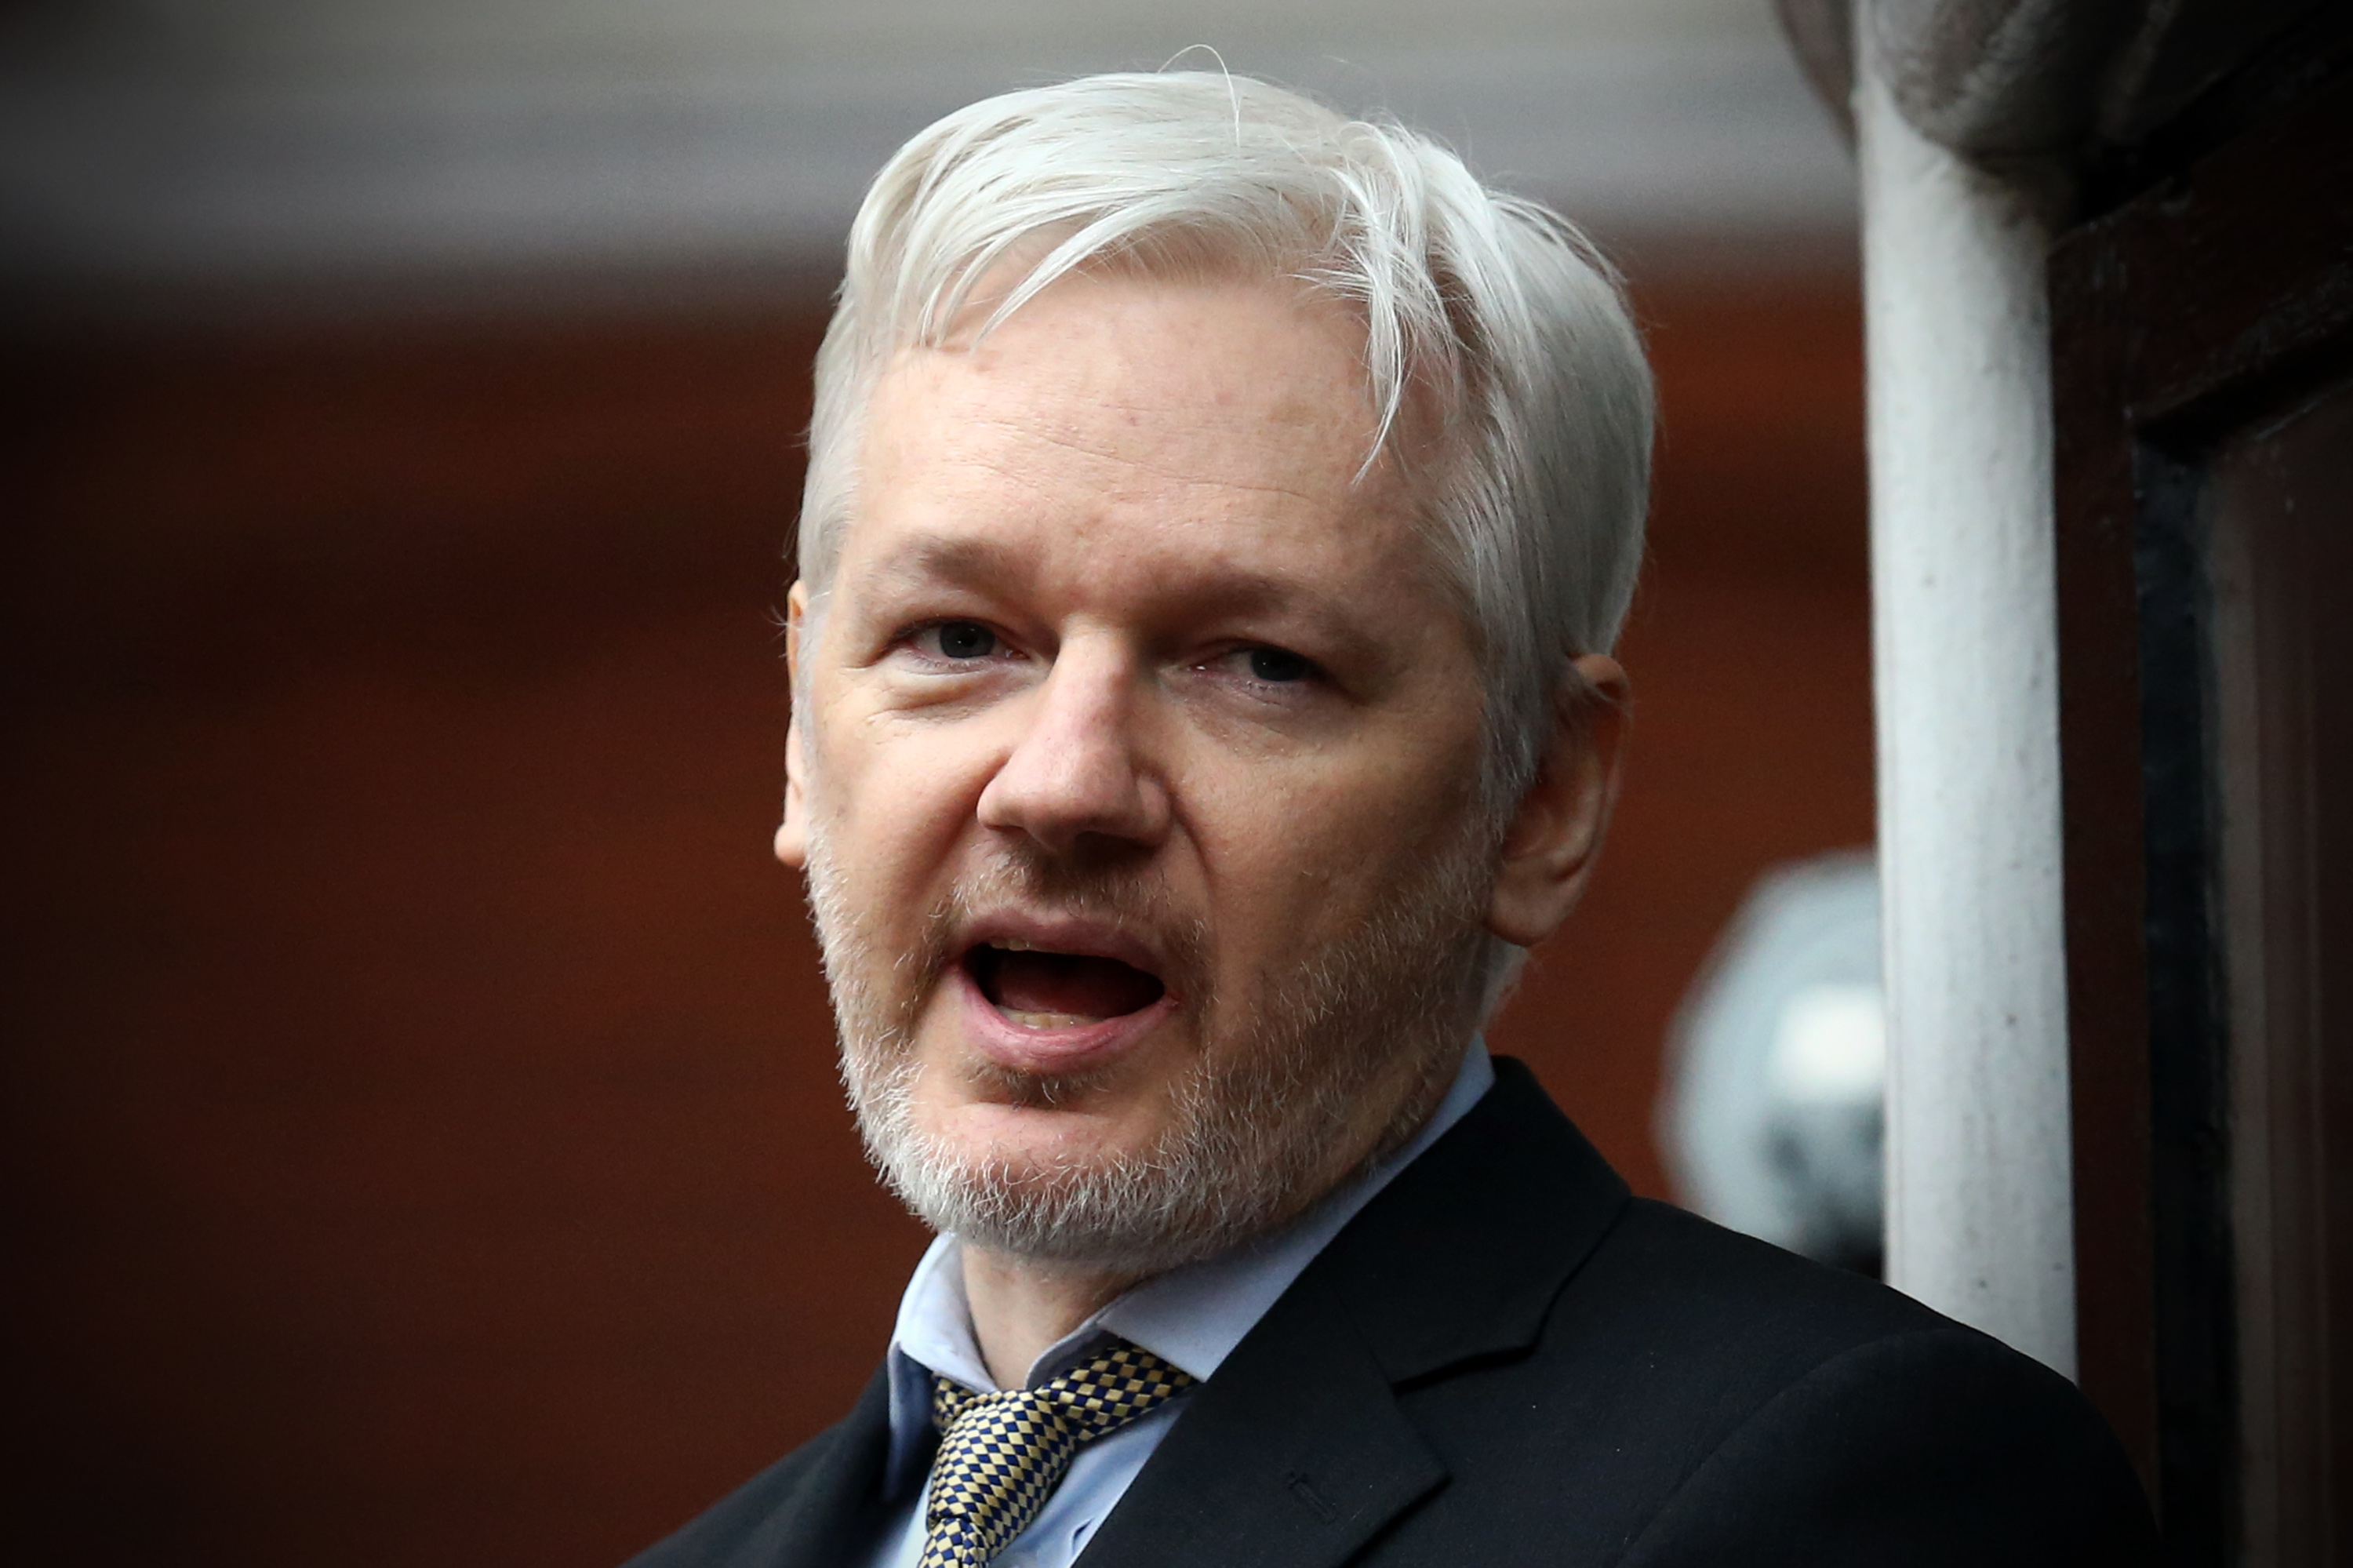 Wikileaks founder Julian Assange speaks from the balcony of the Ecuadorian embassy where  he continues to seek asylum following an extradition request from Sweden in 2012, on Feb. 5, 2016 in London, England. (Carl Court/Getty Images)